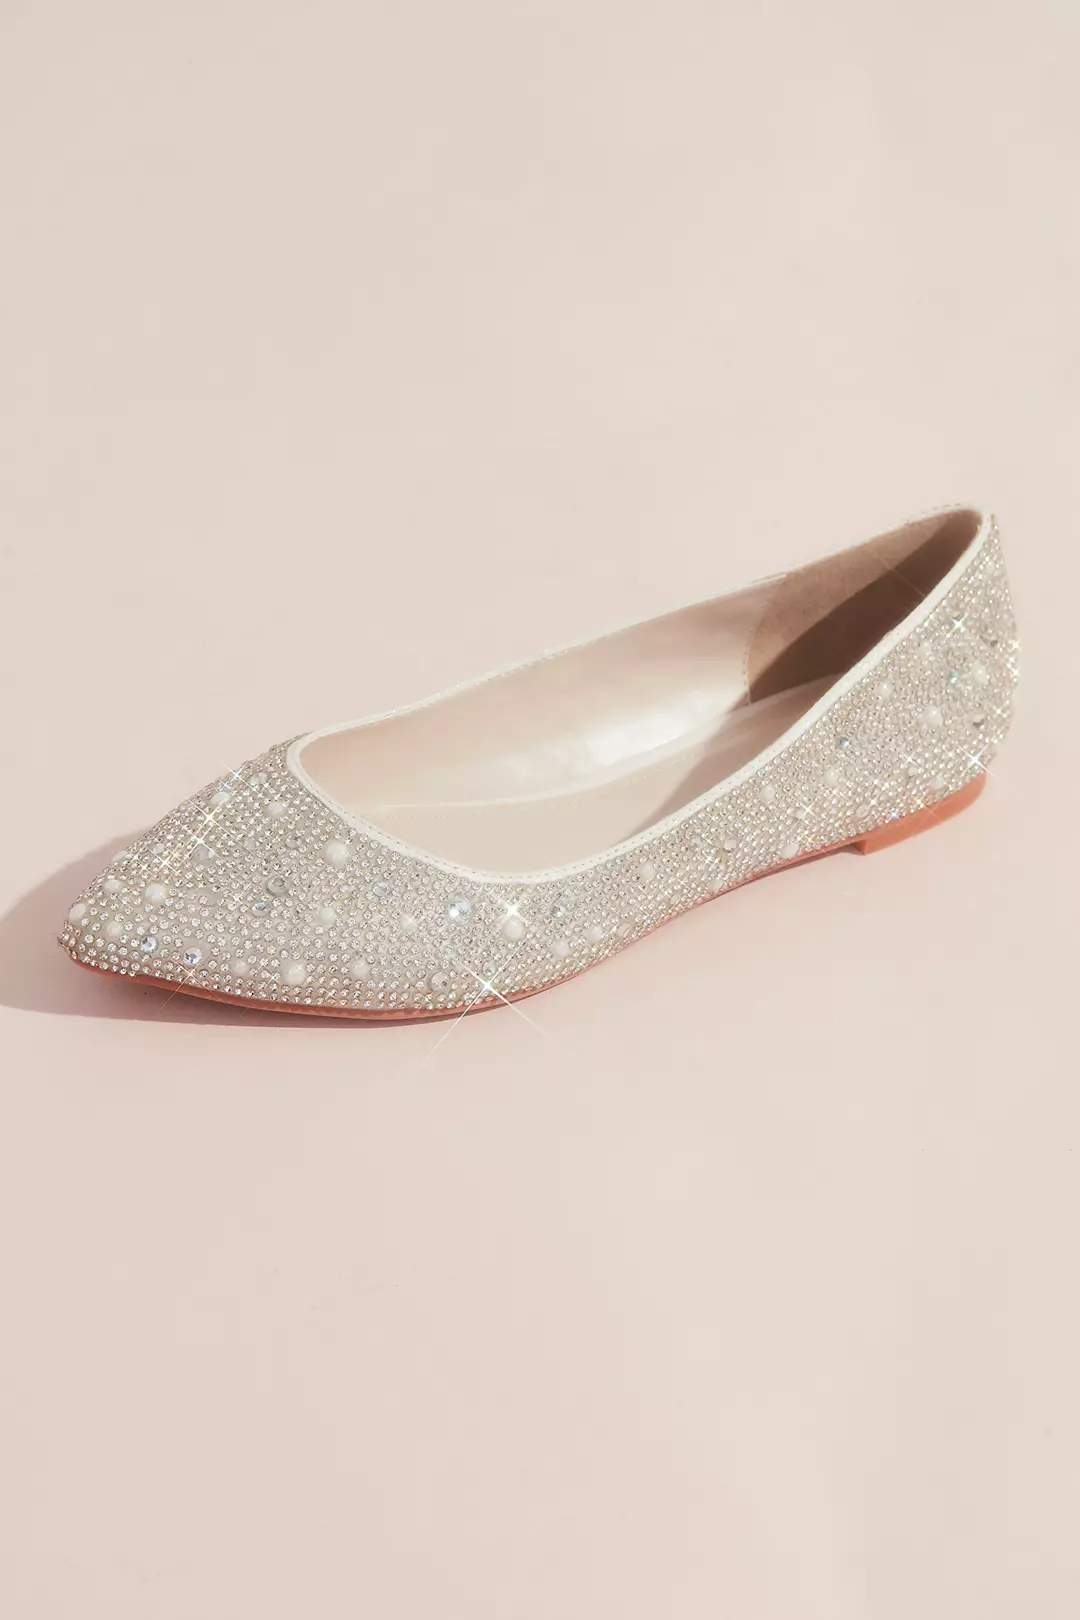 Crystal and Iridescent Stone Ballet Flats Image